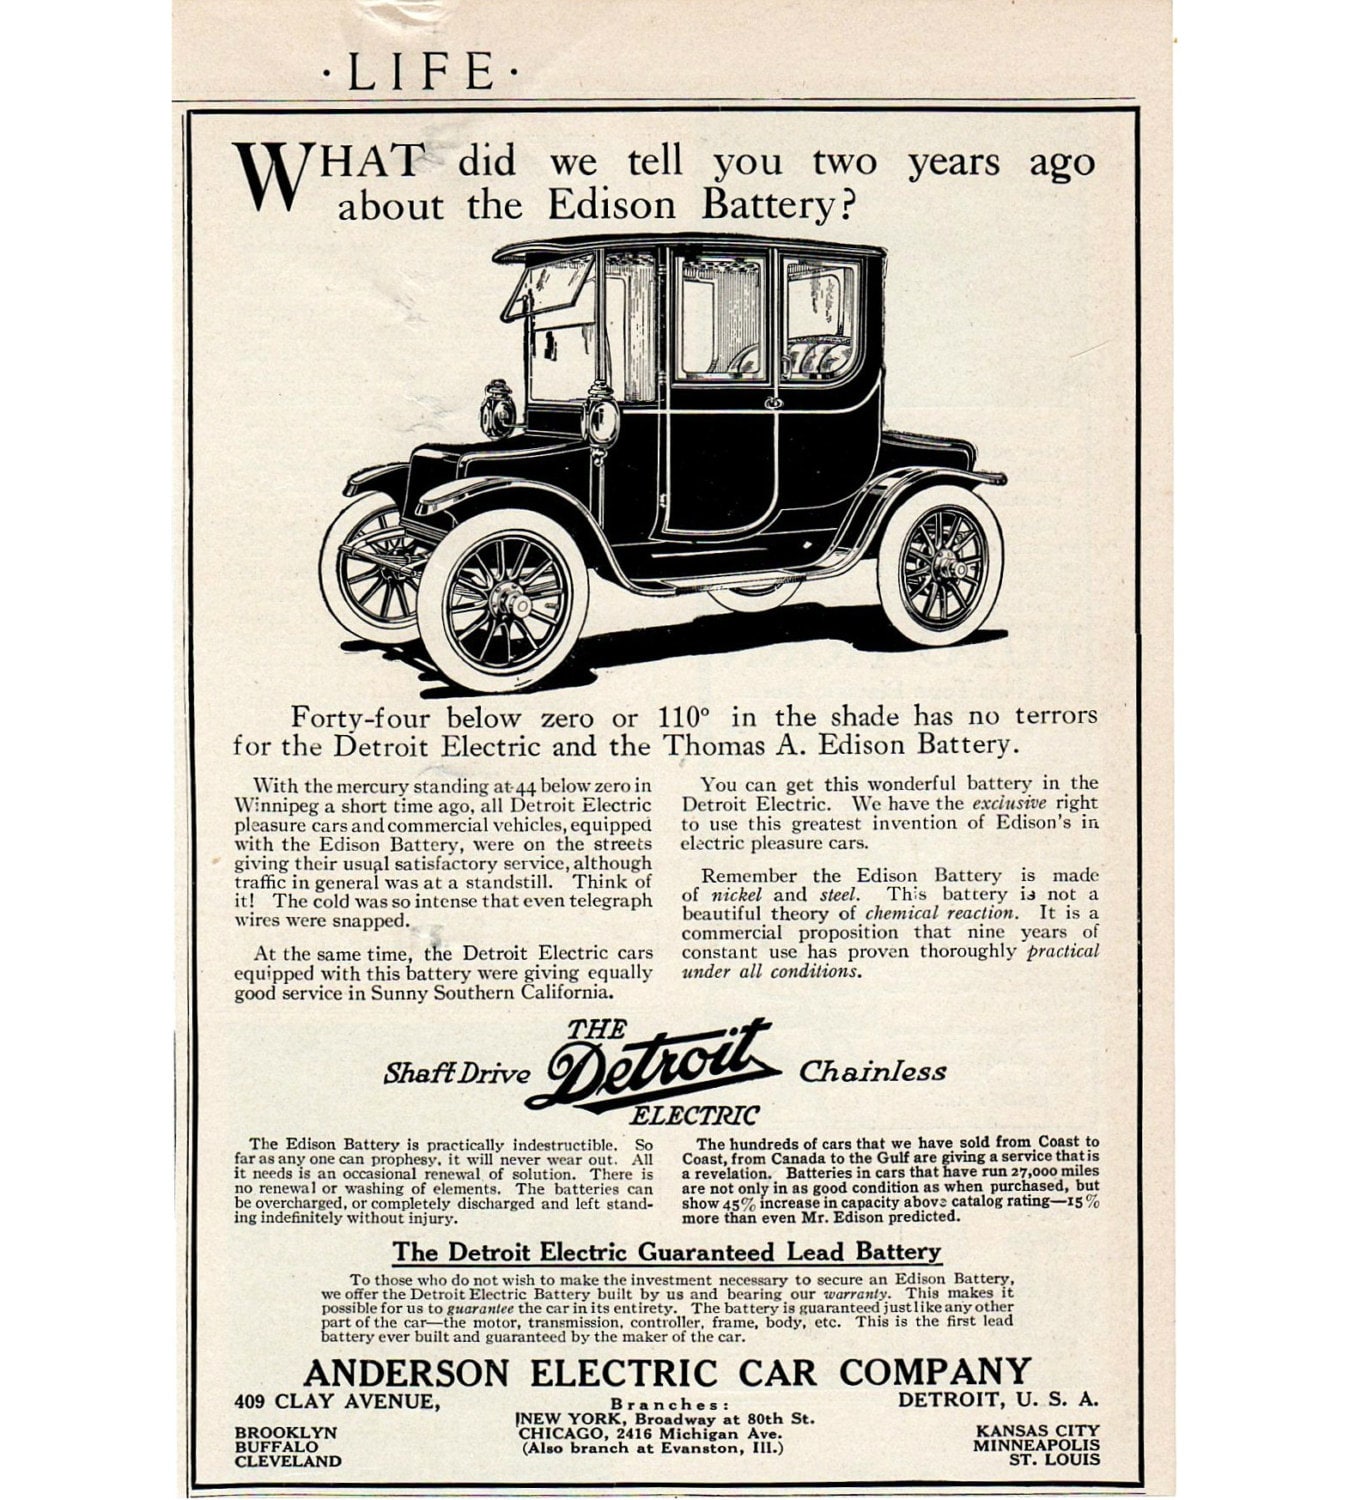 1912 Anderson Electric Car Company Detroit Electric Chainless